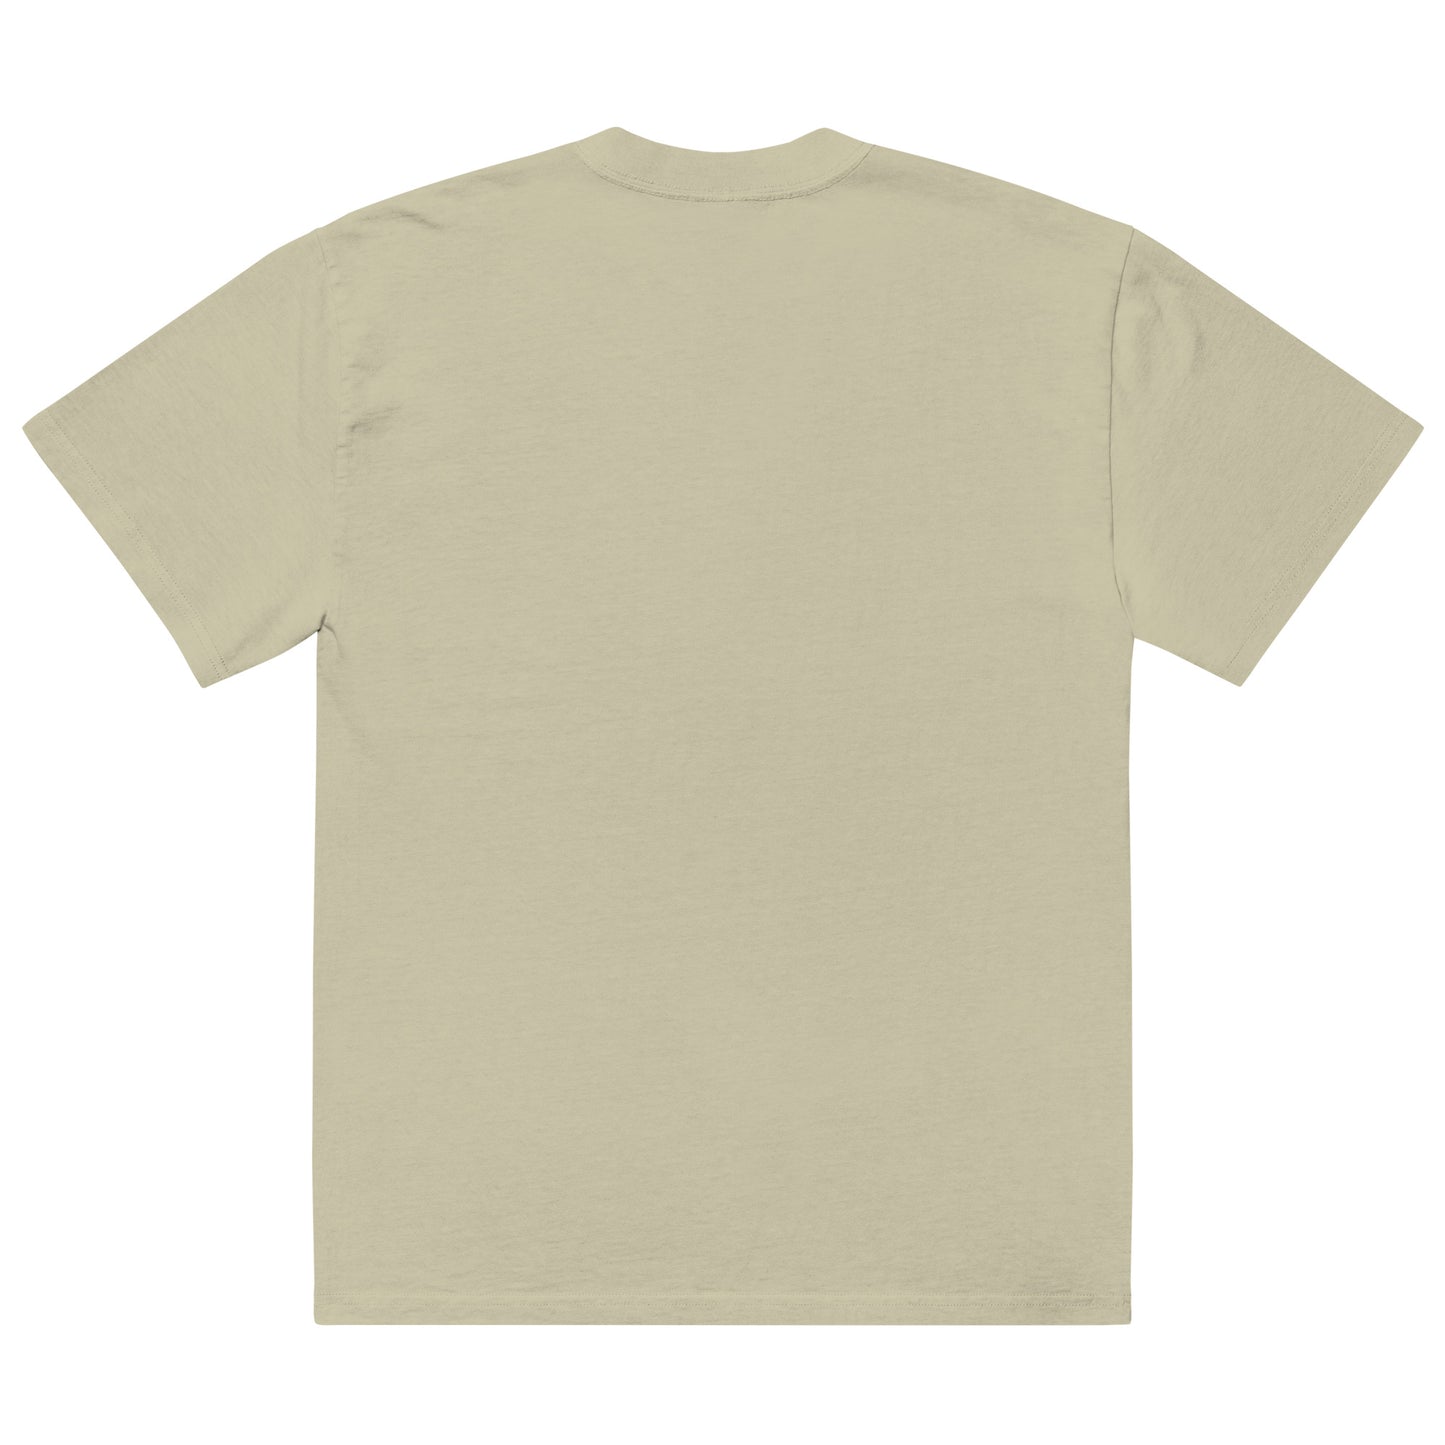 G Oversized faded t-shirt